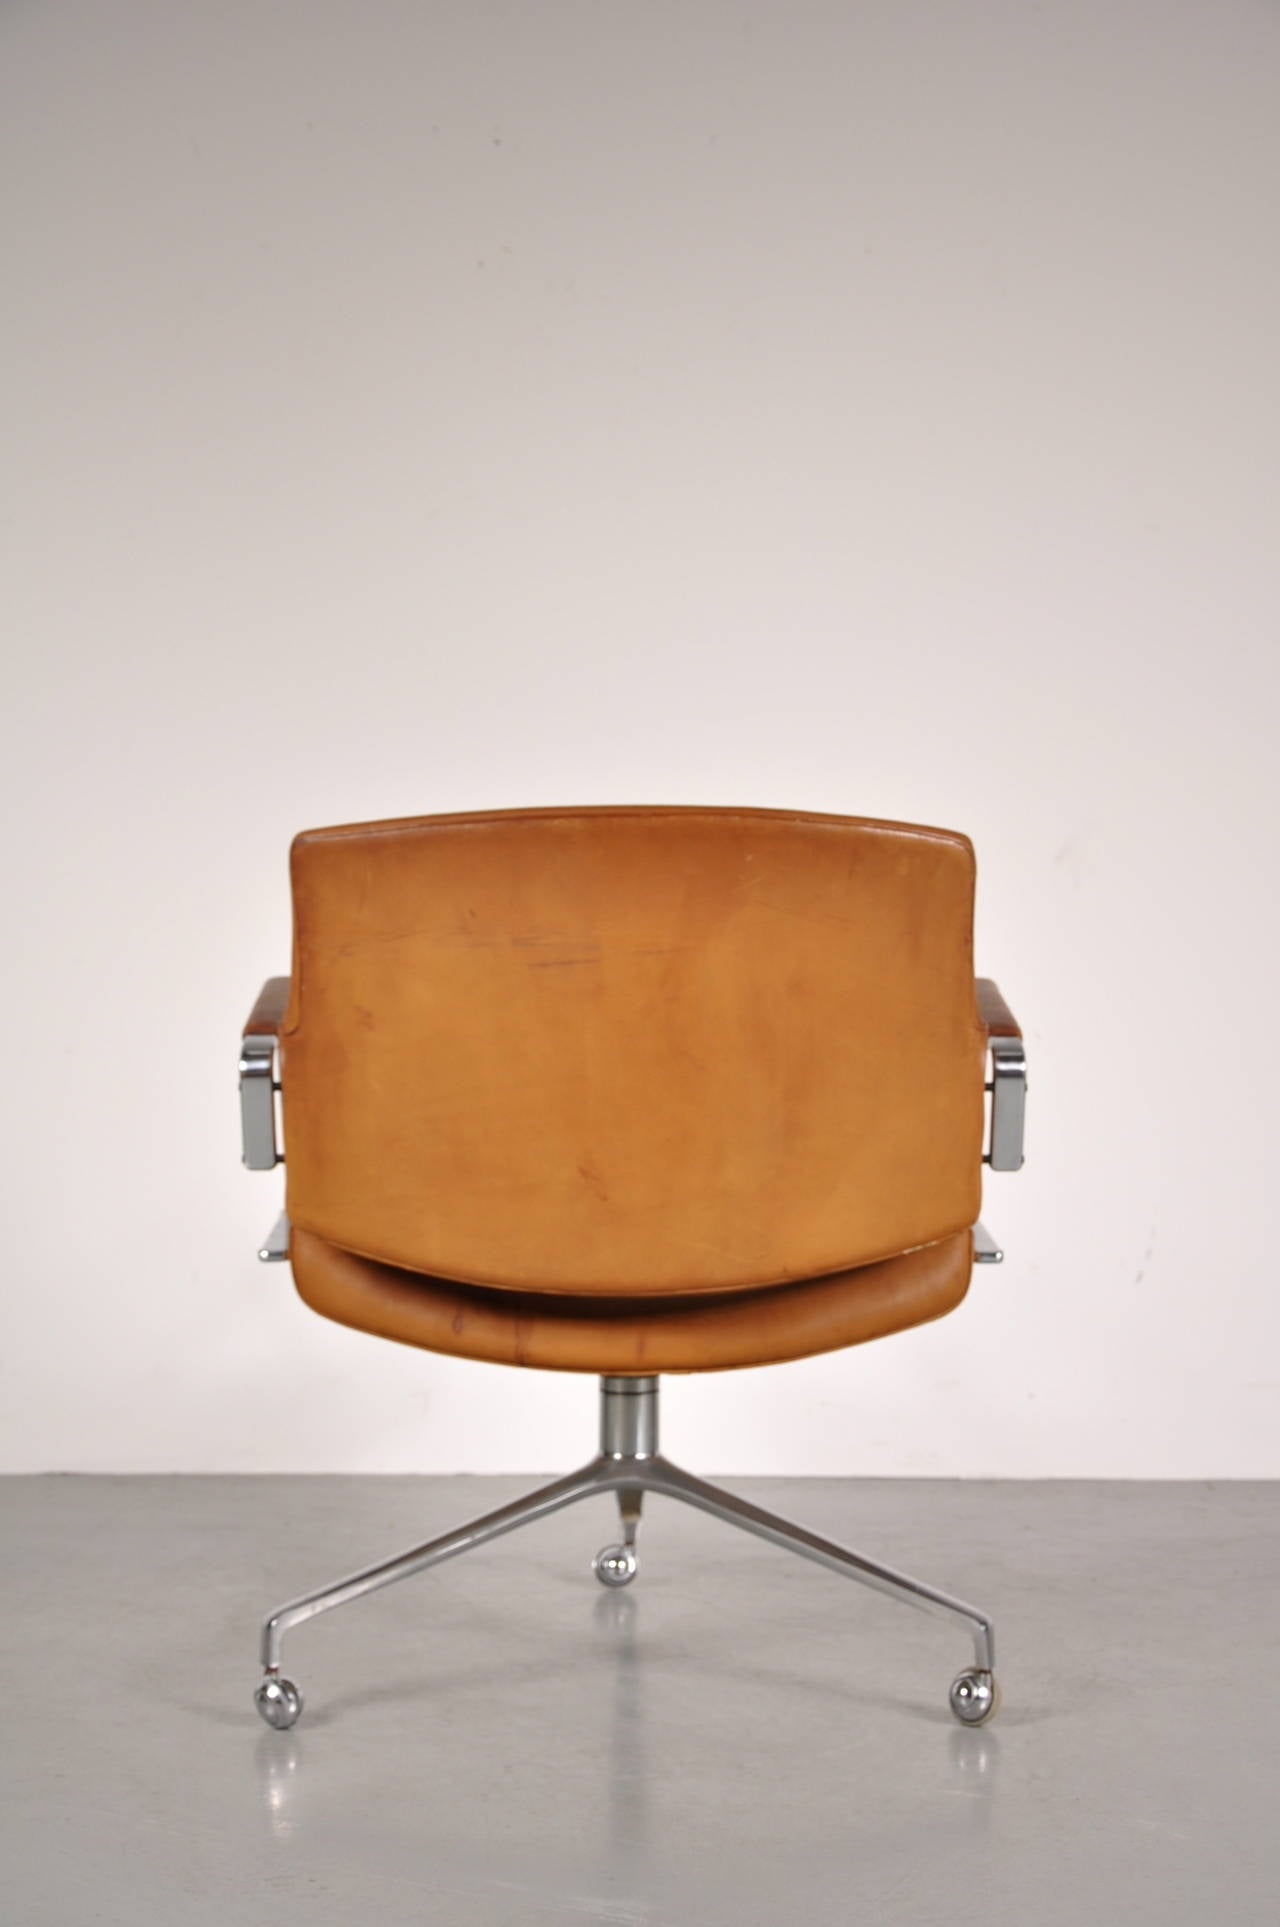 Stunning brown leather conference chair by Preben Fabricius and Jorgen Kastholm, manufactured by Kill International around 1960.

Upholstered in original beautiful cognac leather with two small damages, as shown on the pictures. On a matte chromed